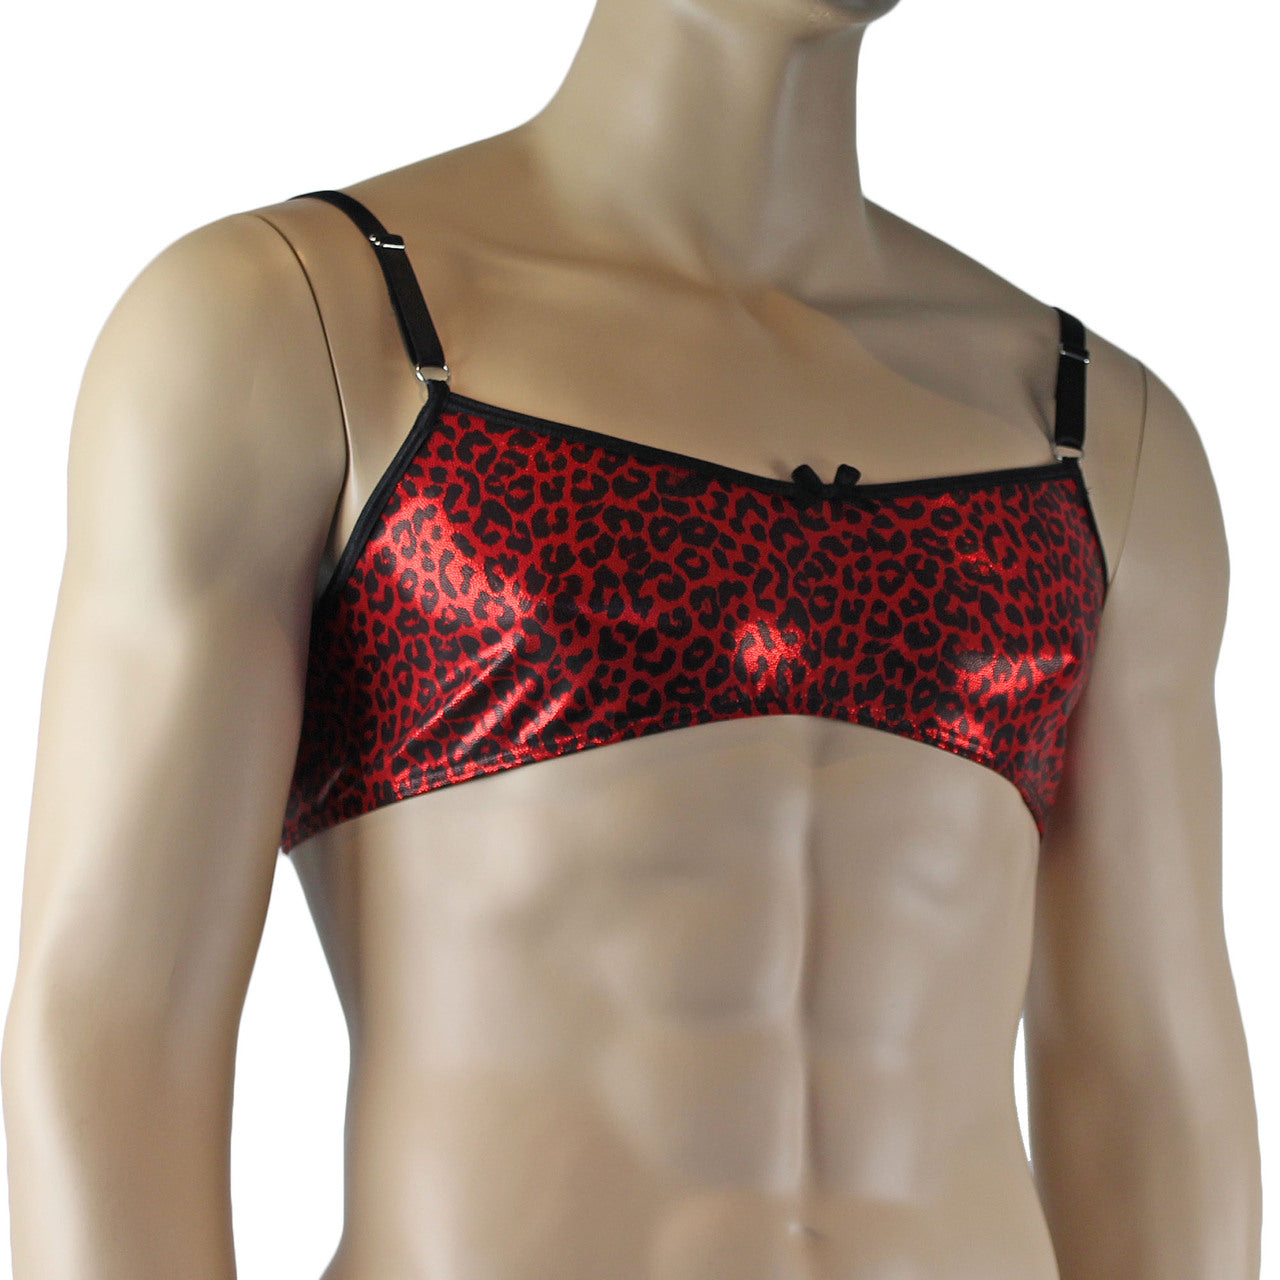 Mens Dazzle Animal Leopard Print Bra Top for Males Red